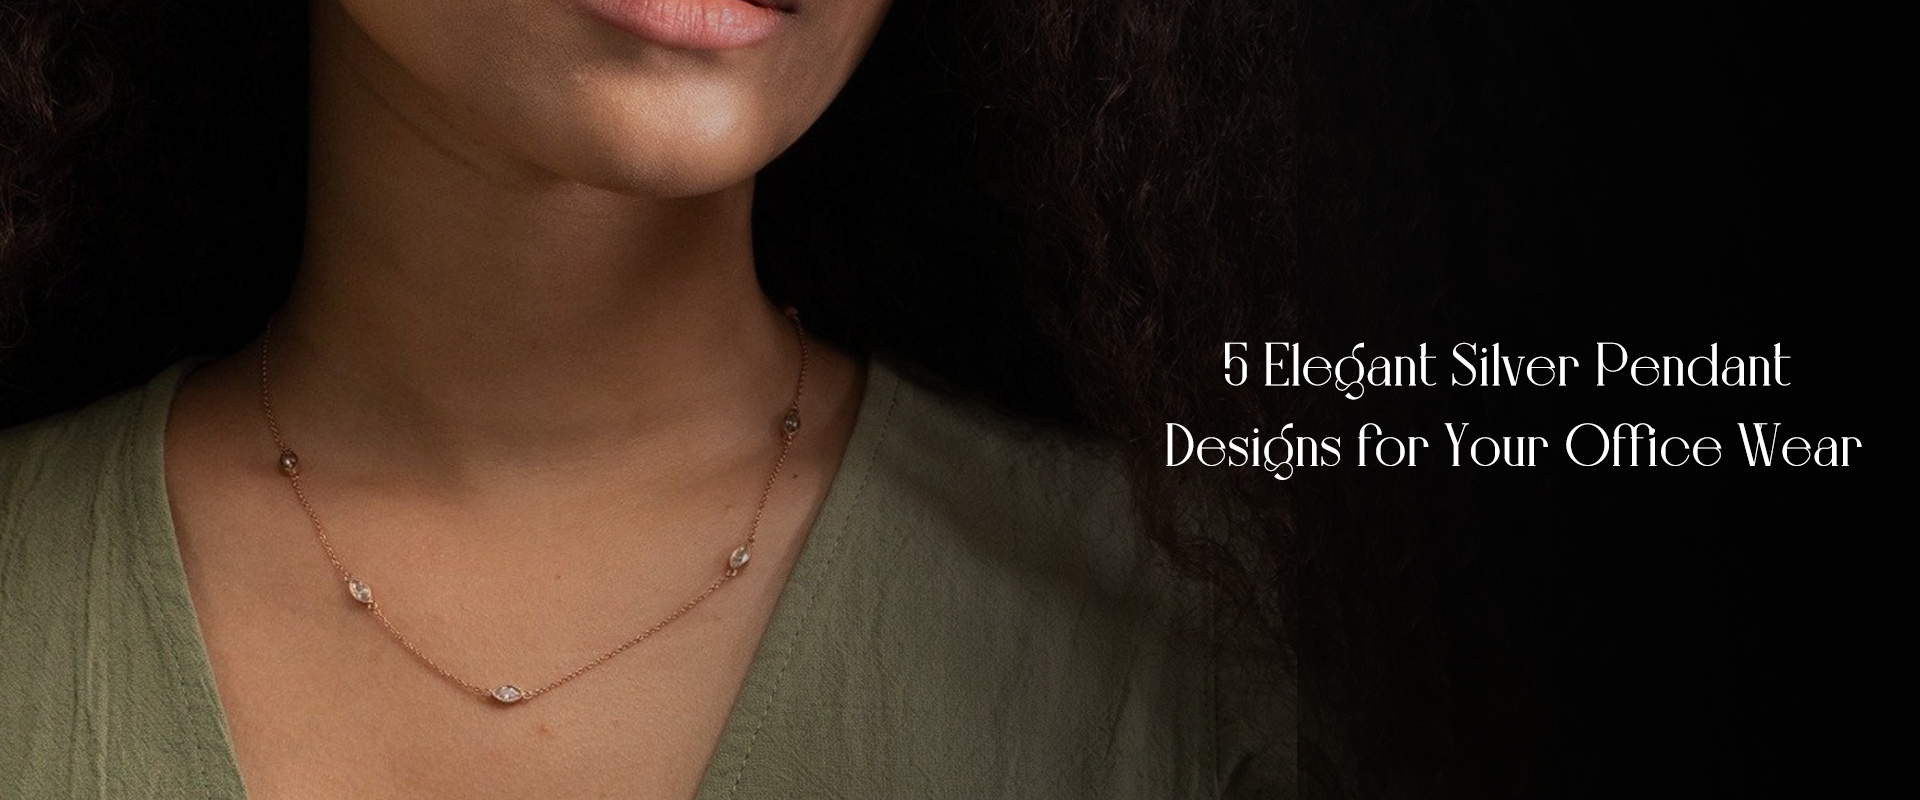 5 Elegant Silver Pendant Designs for Your Office Wear